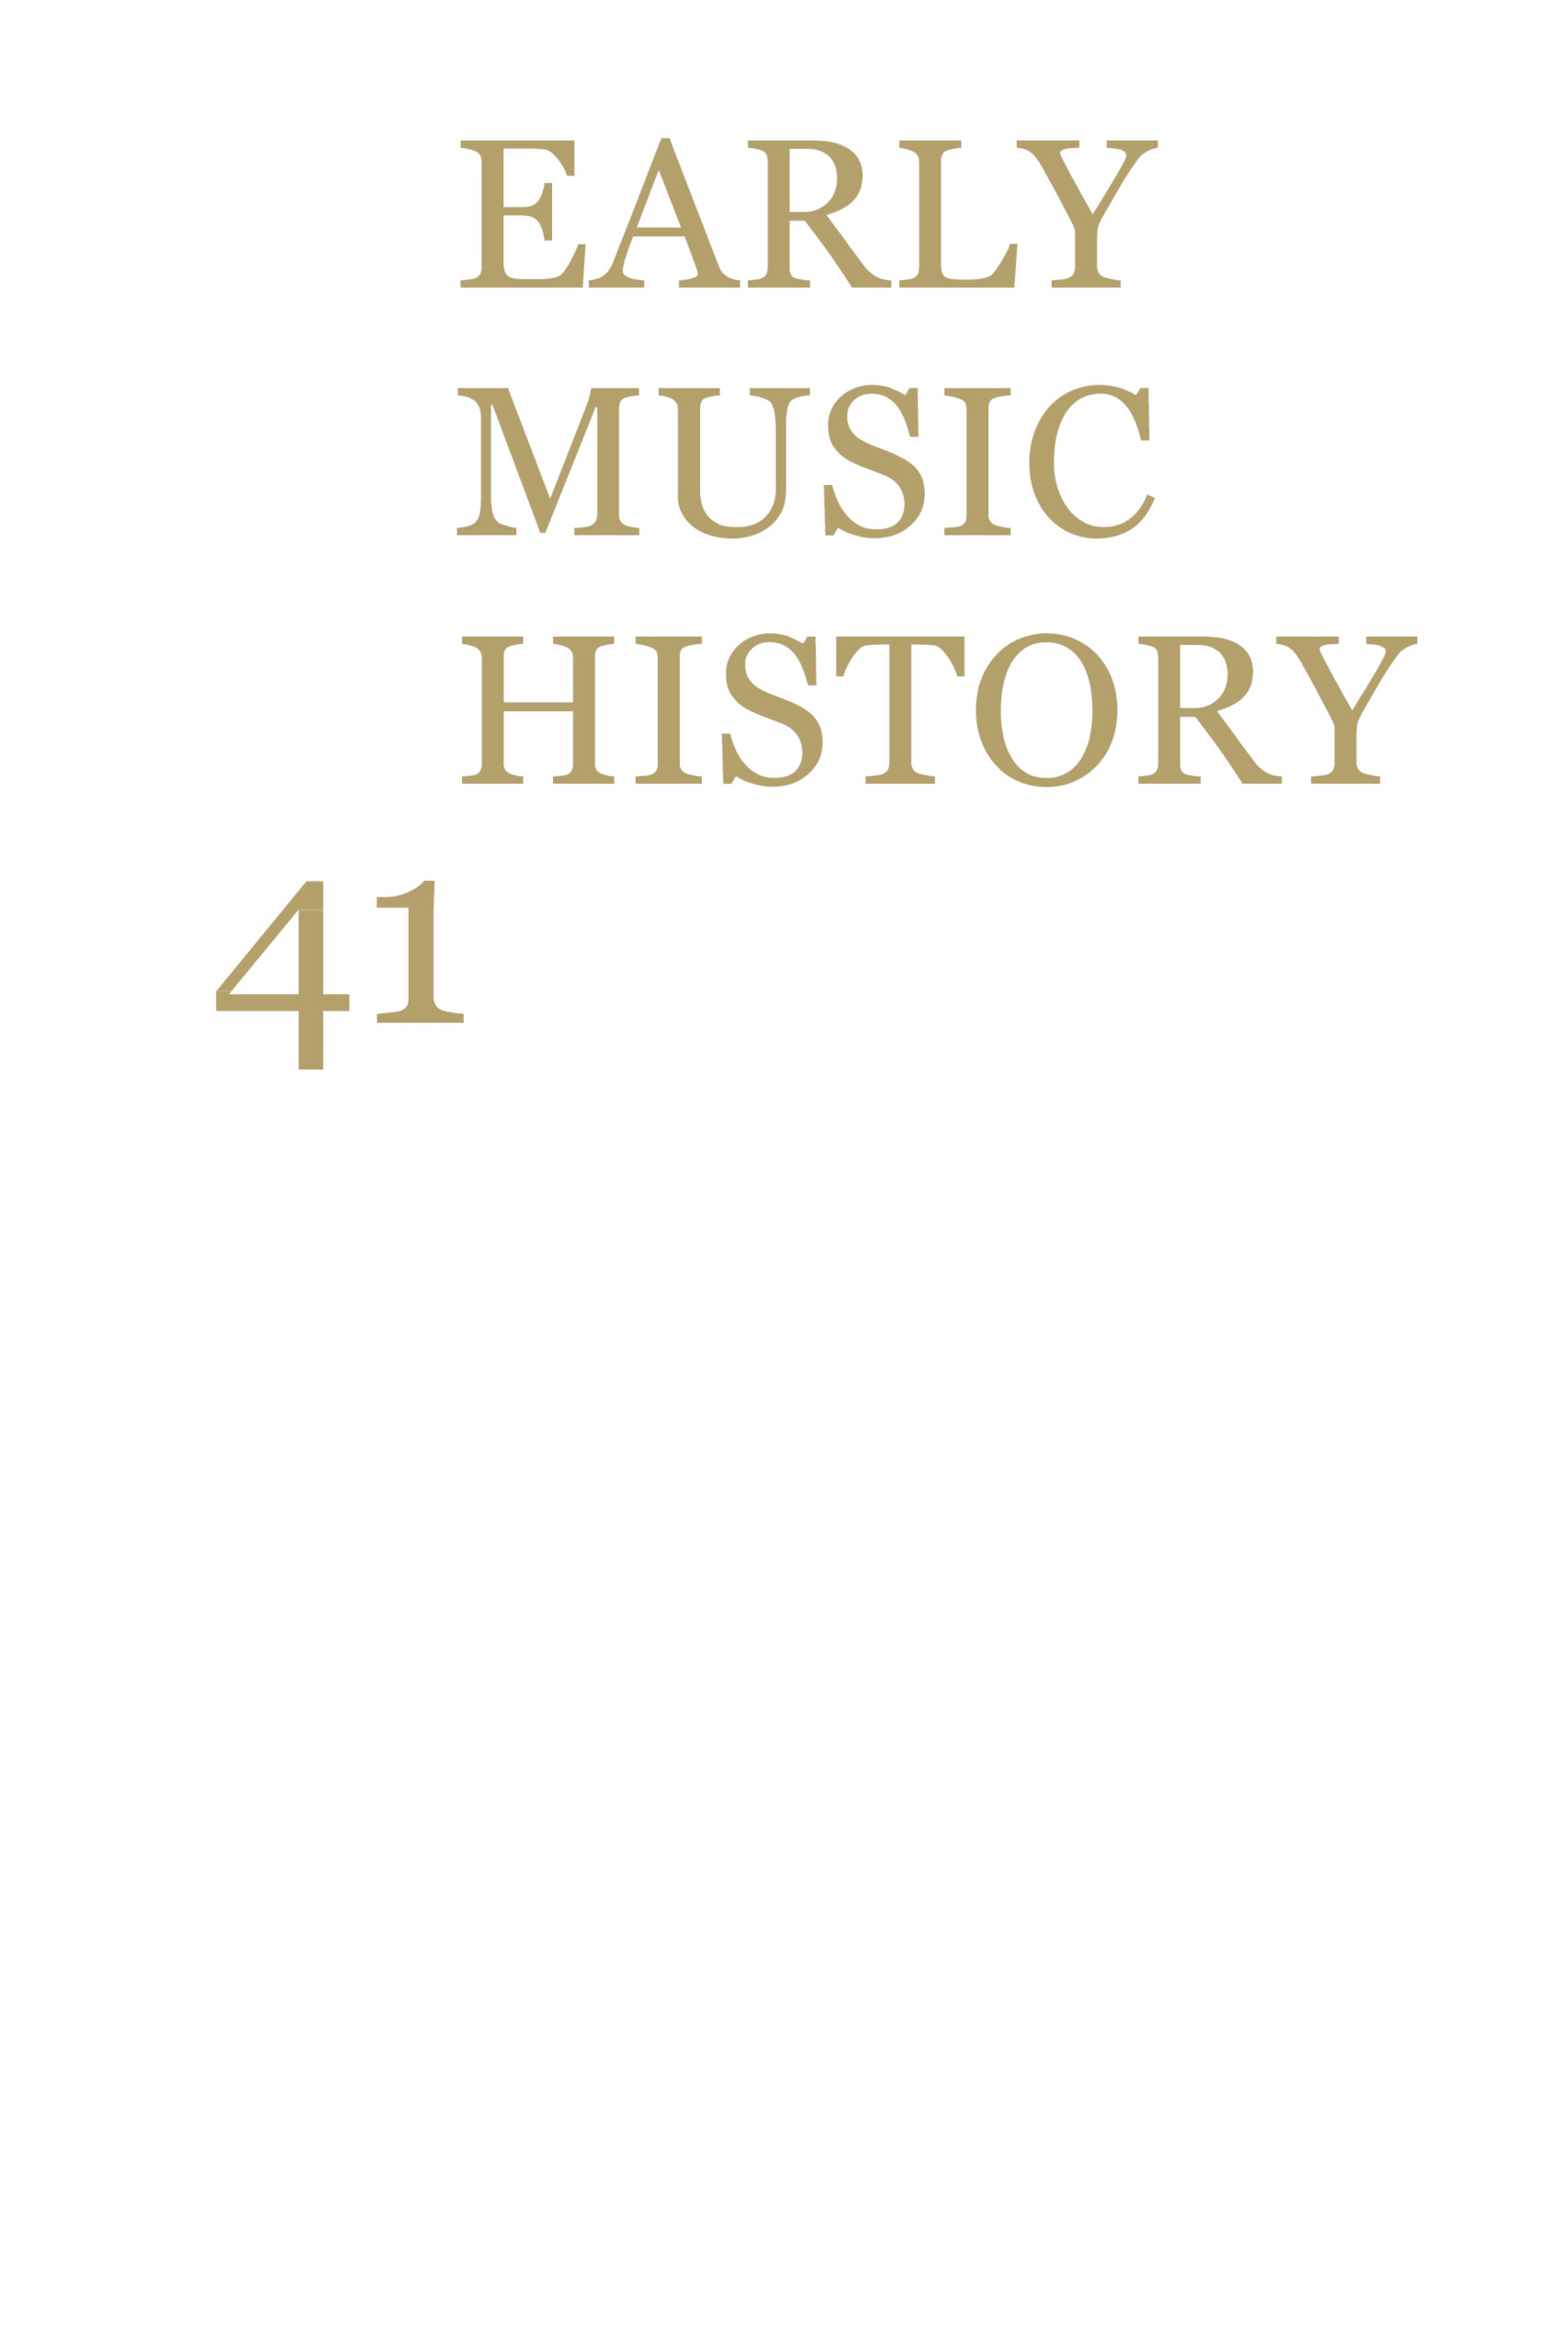 what is the history of music